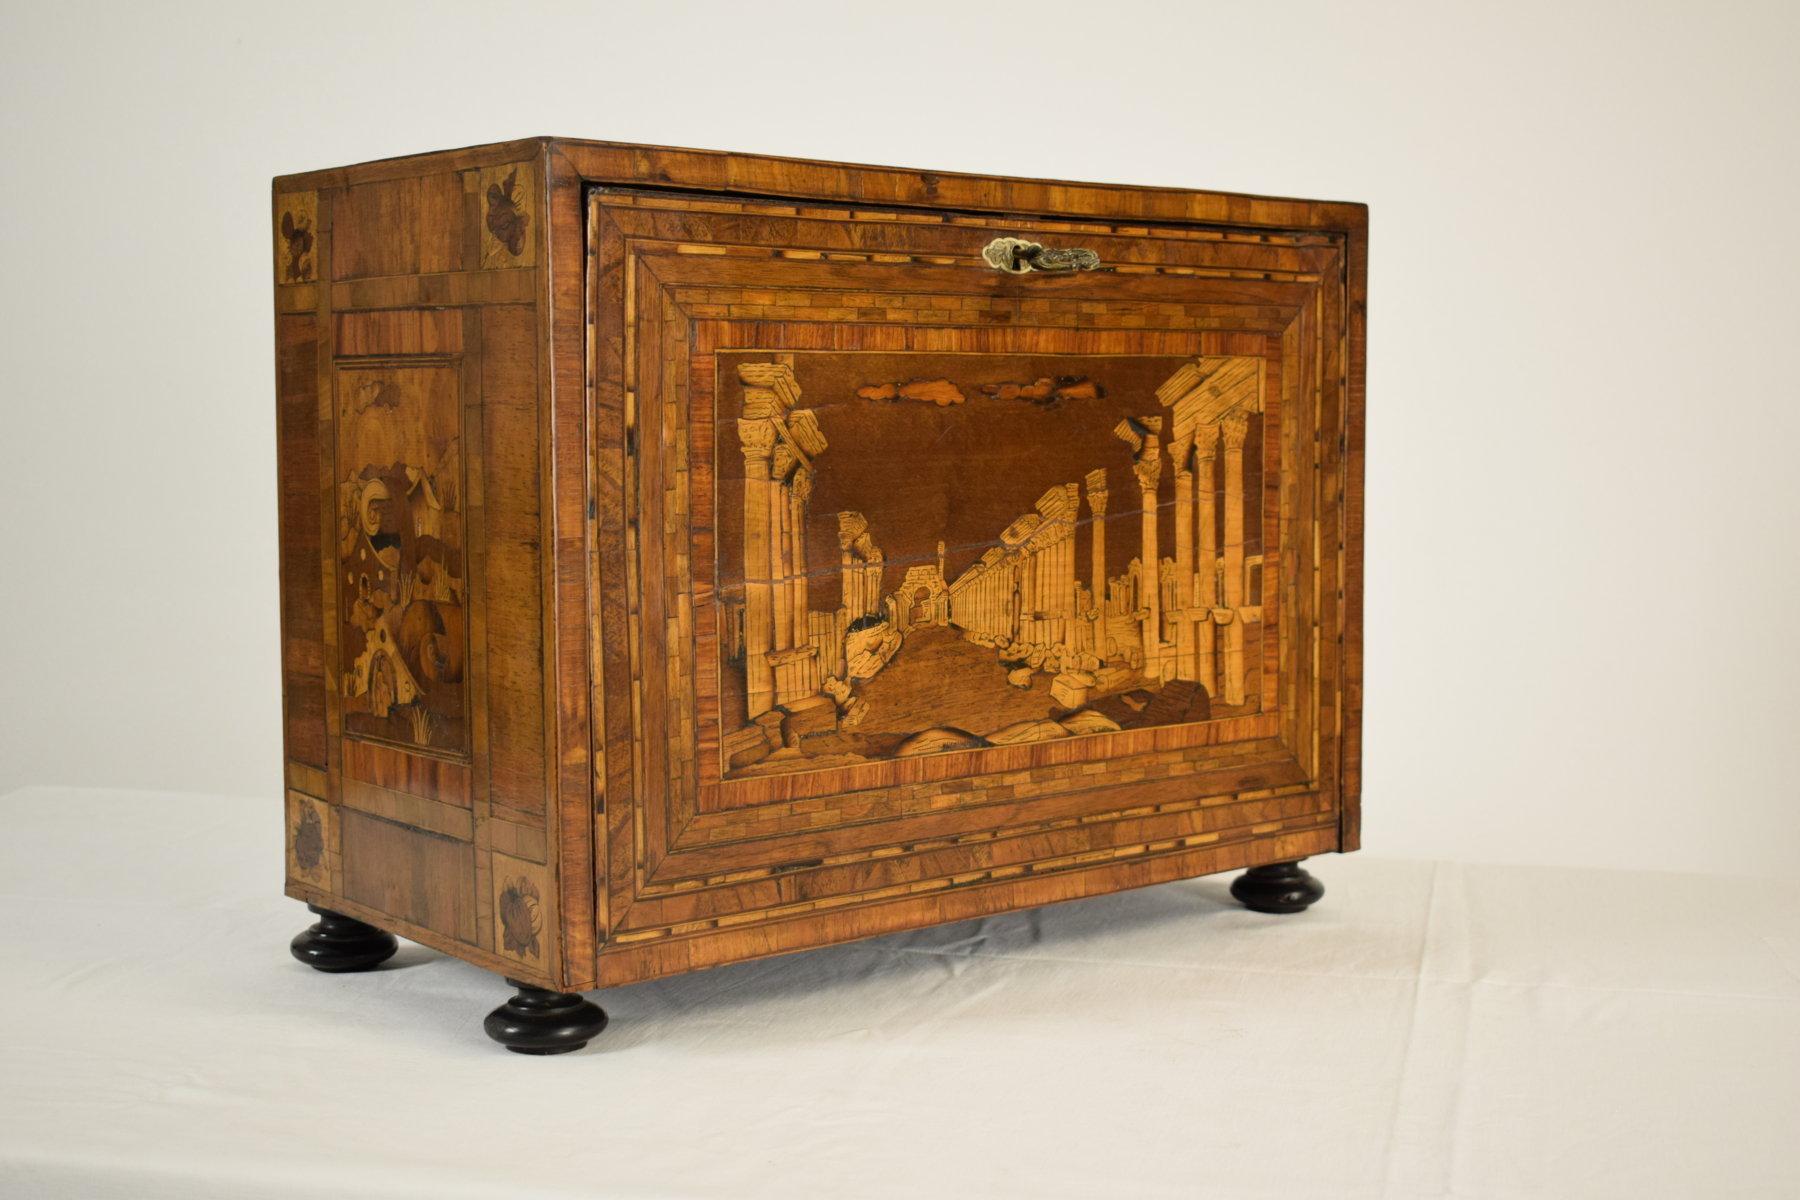  17th Century, German Wood Apothecary Cabinet with Fantasy Architectures For Sale 5